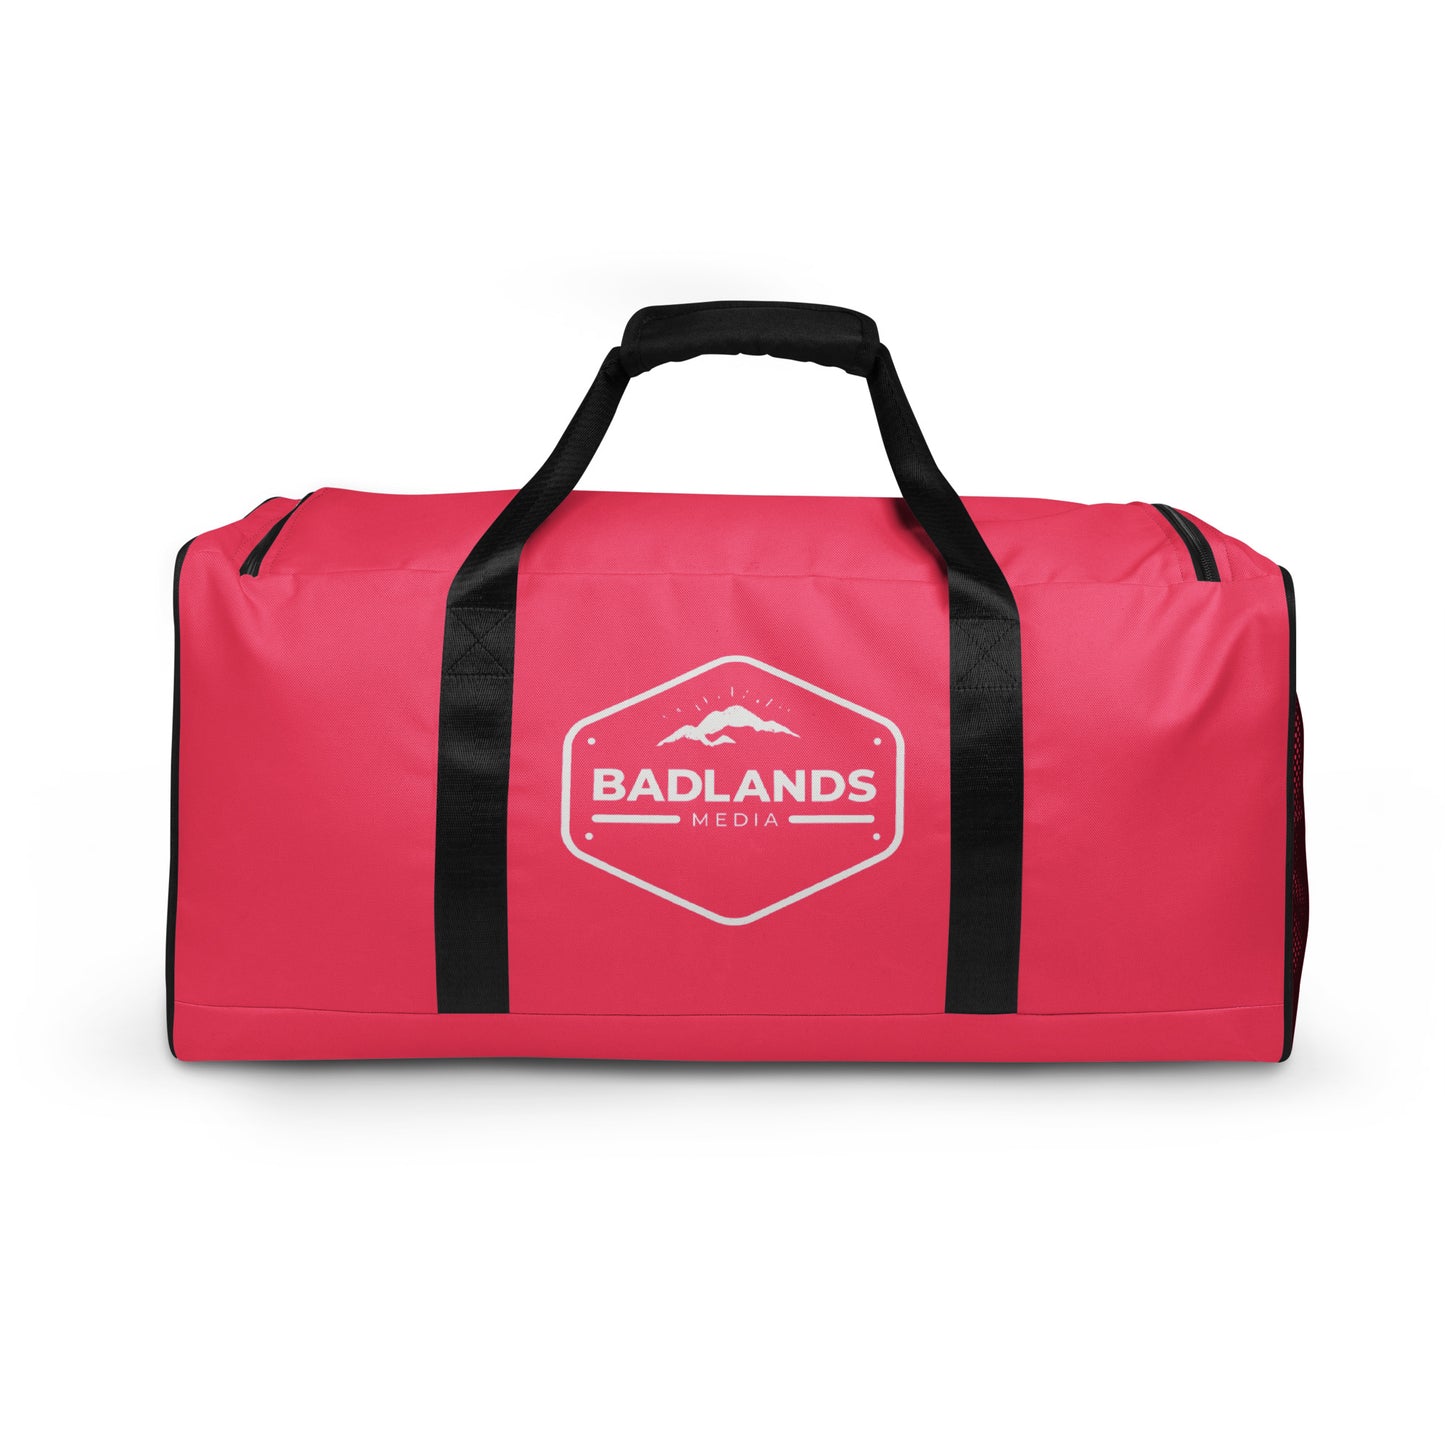 Badlands Extra Large Duffle Bag in bubble gum